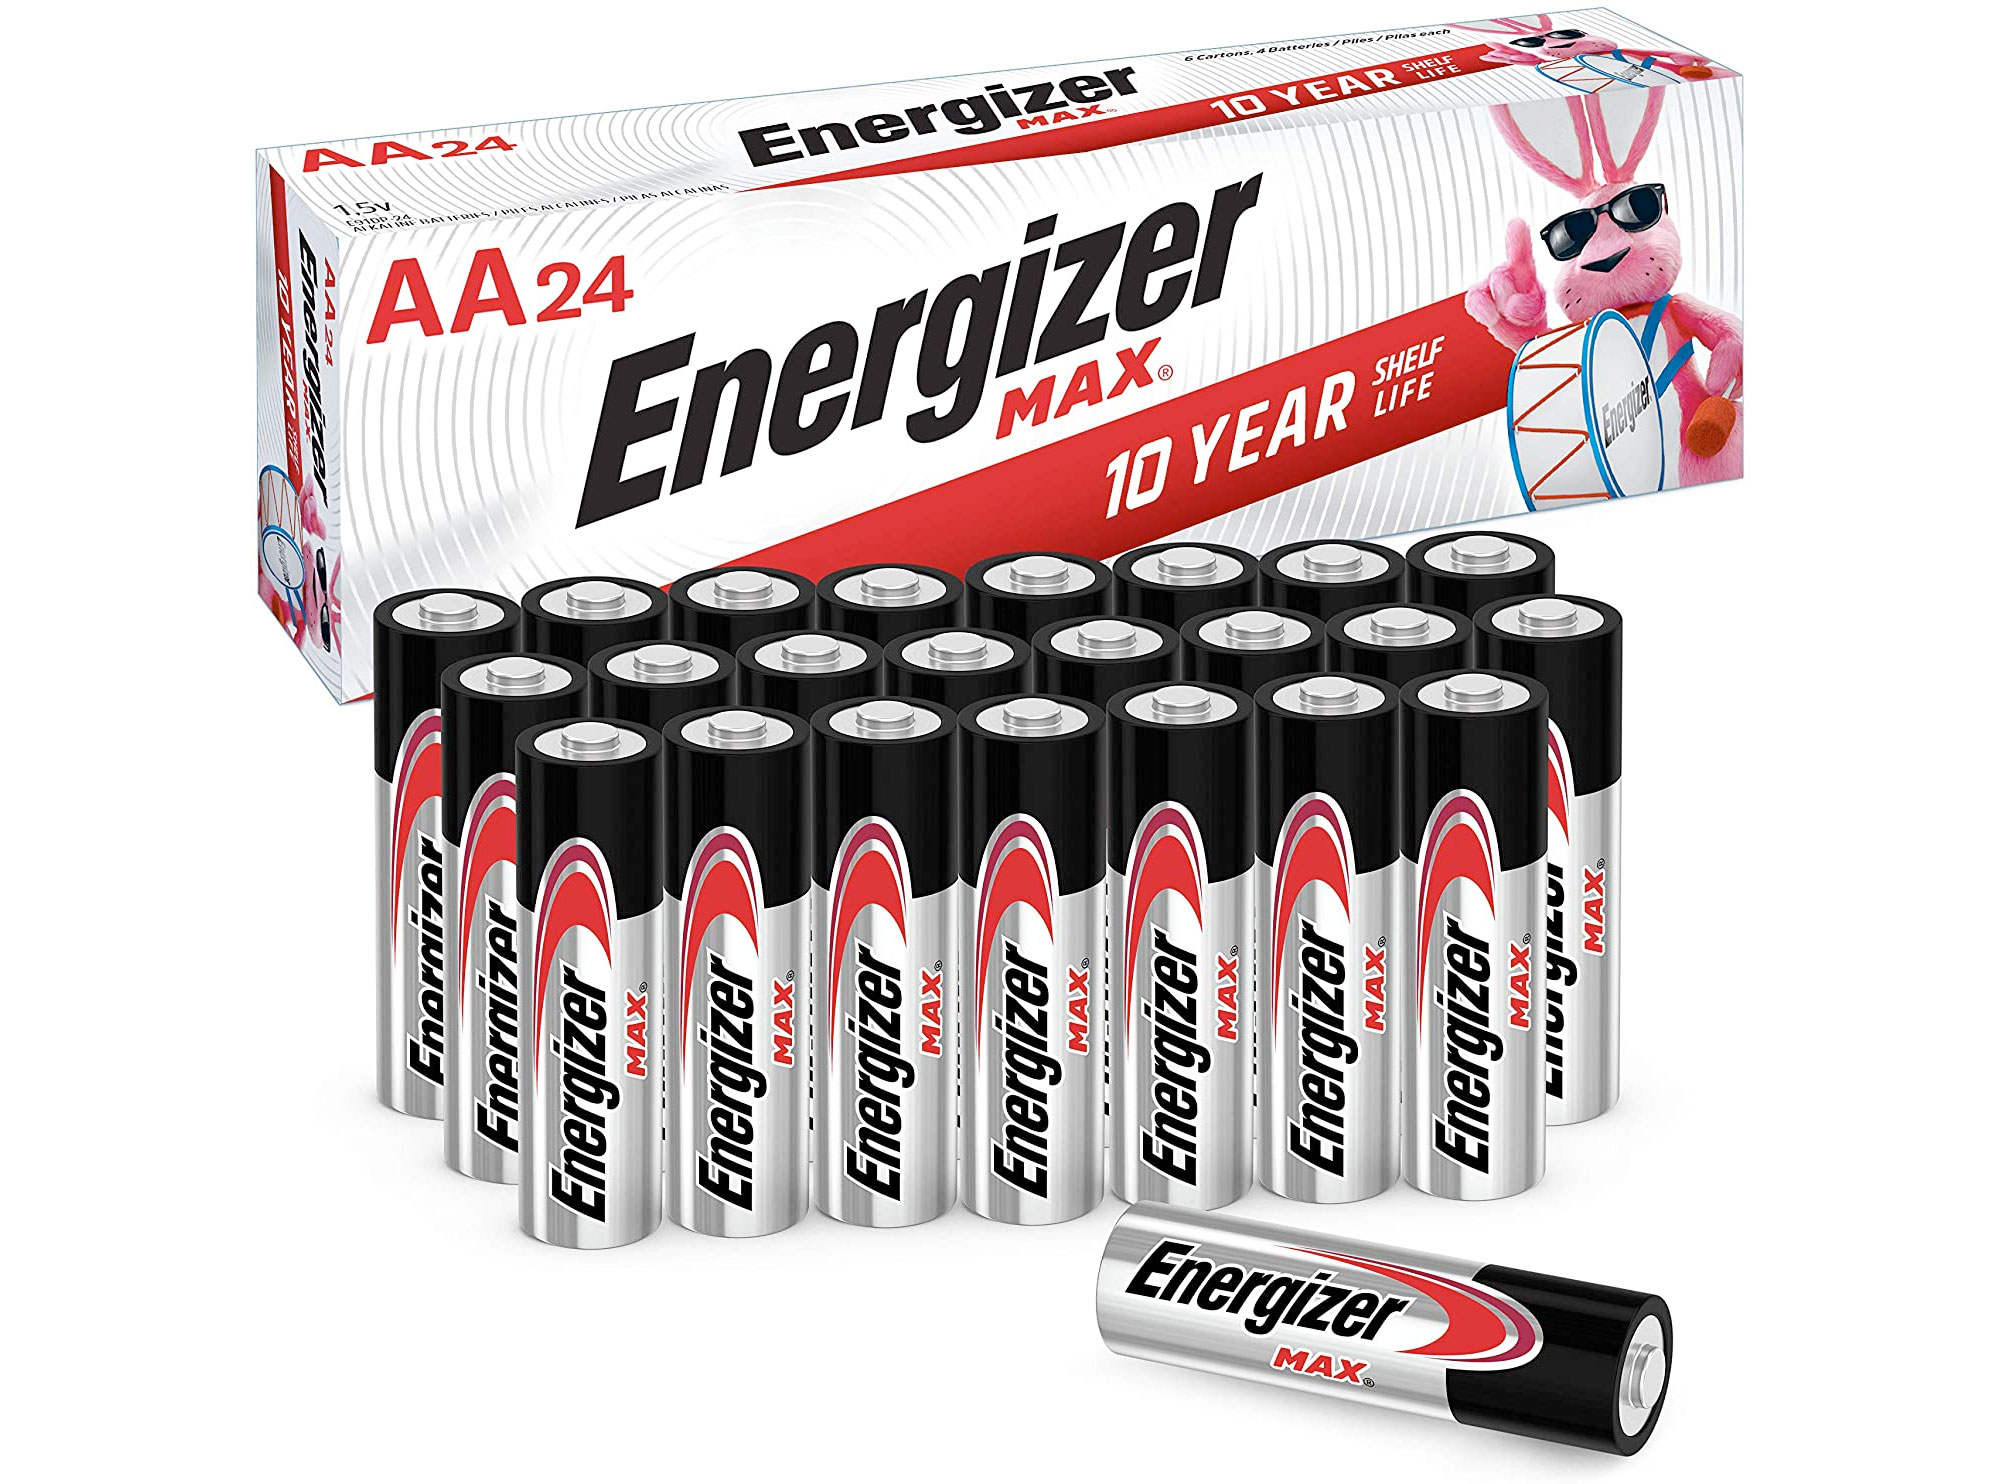 Amazon：Energizer MAX AA Batteries(24-Count)只卖$8.87